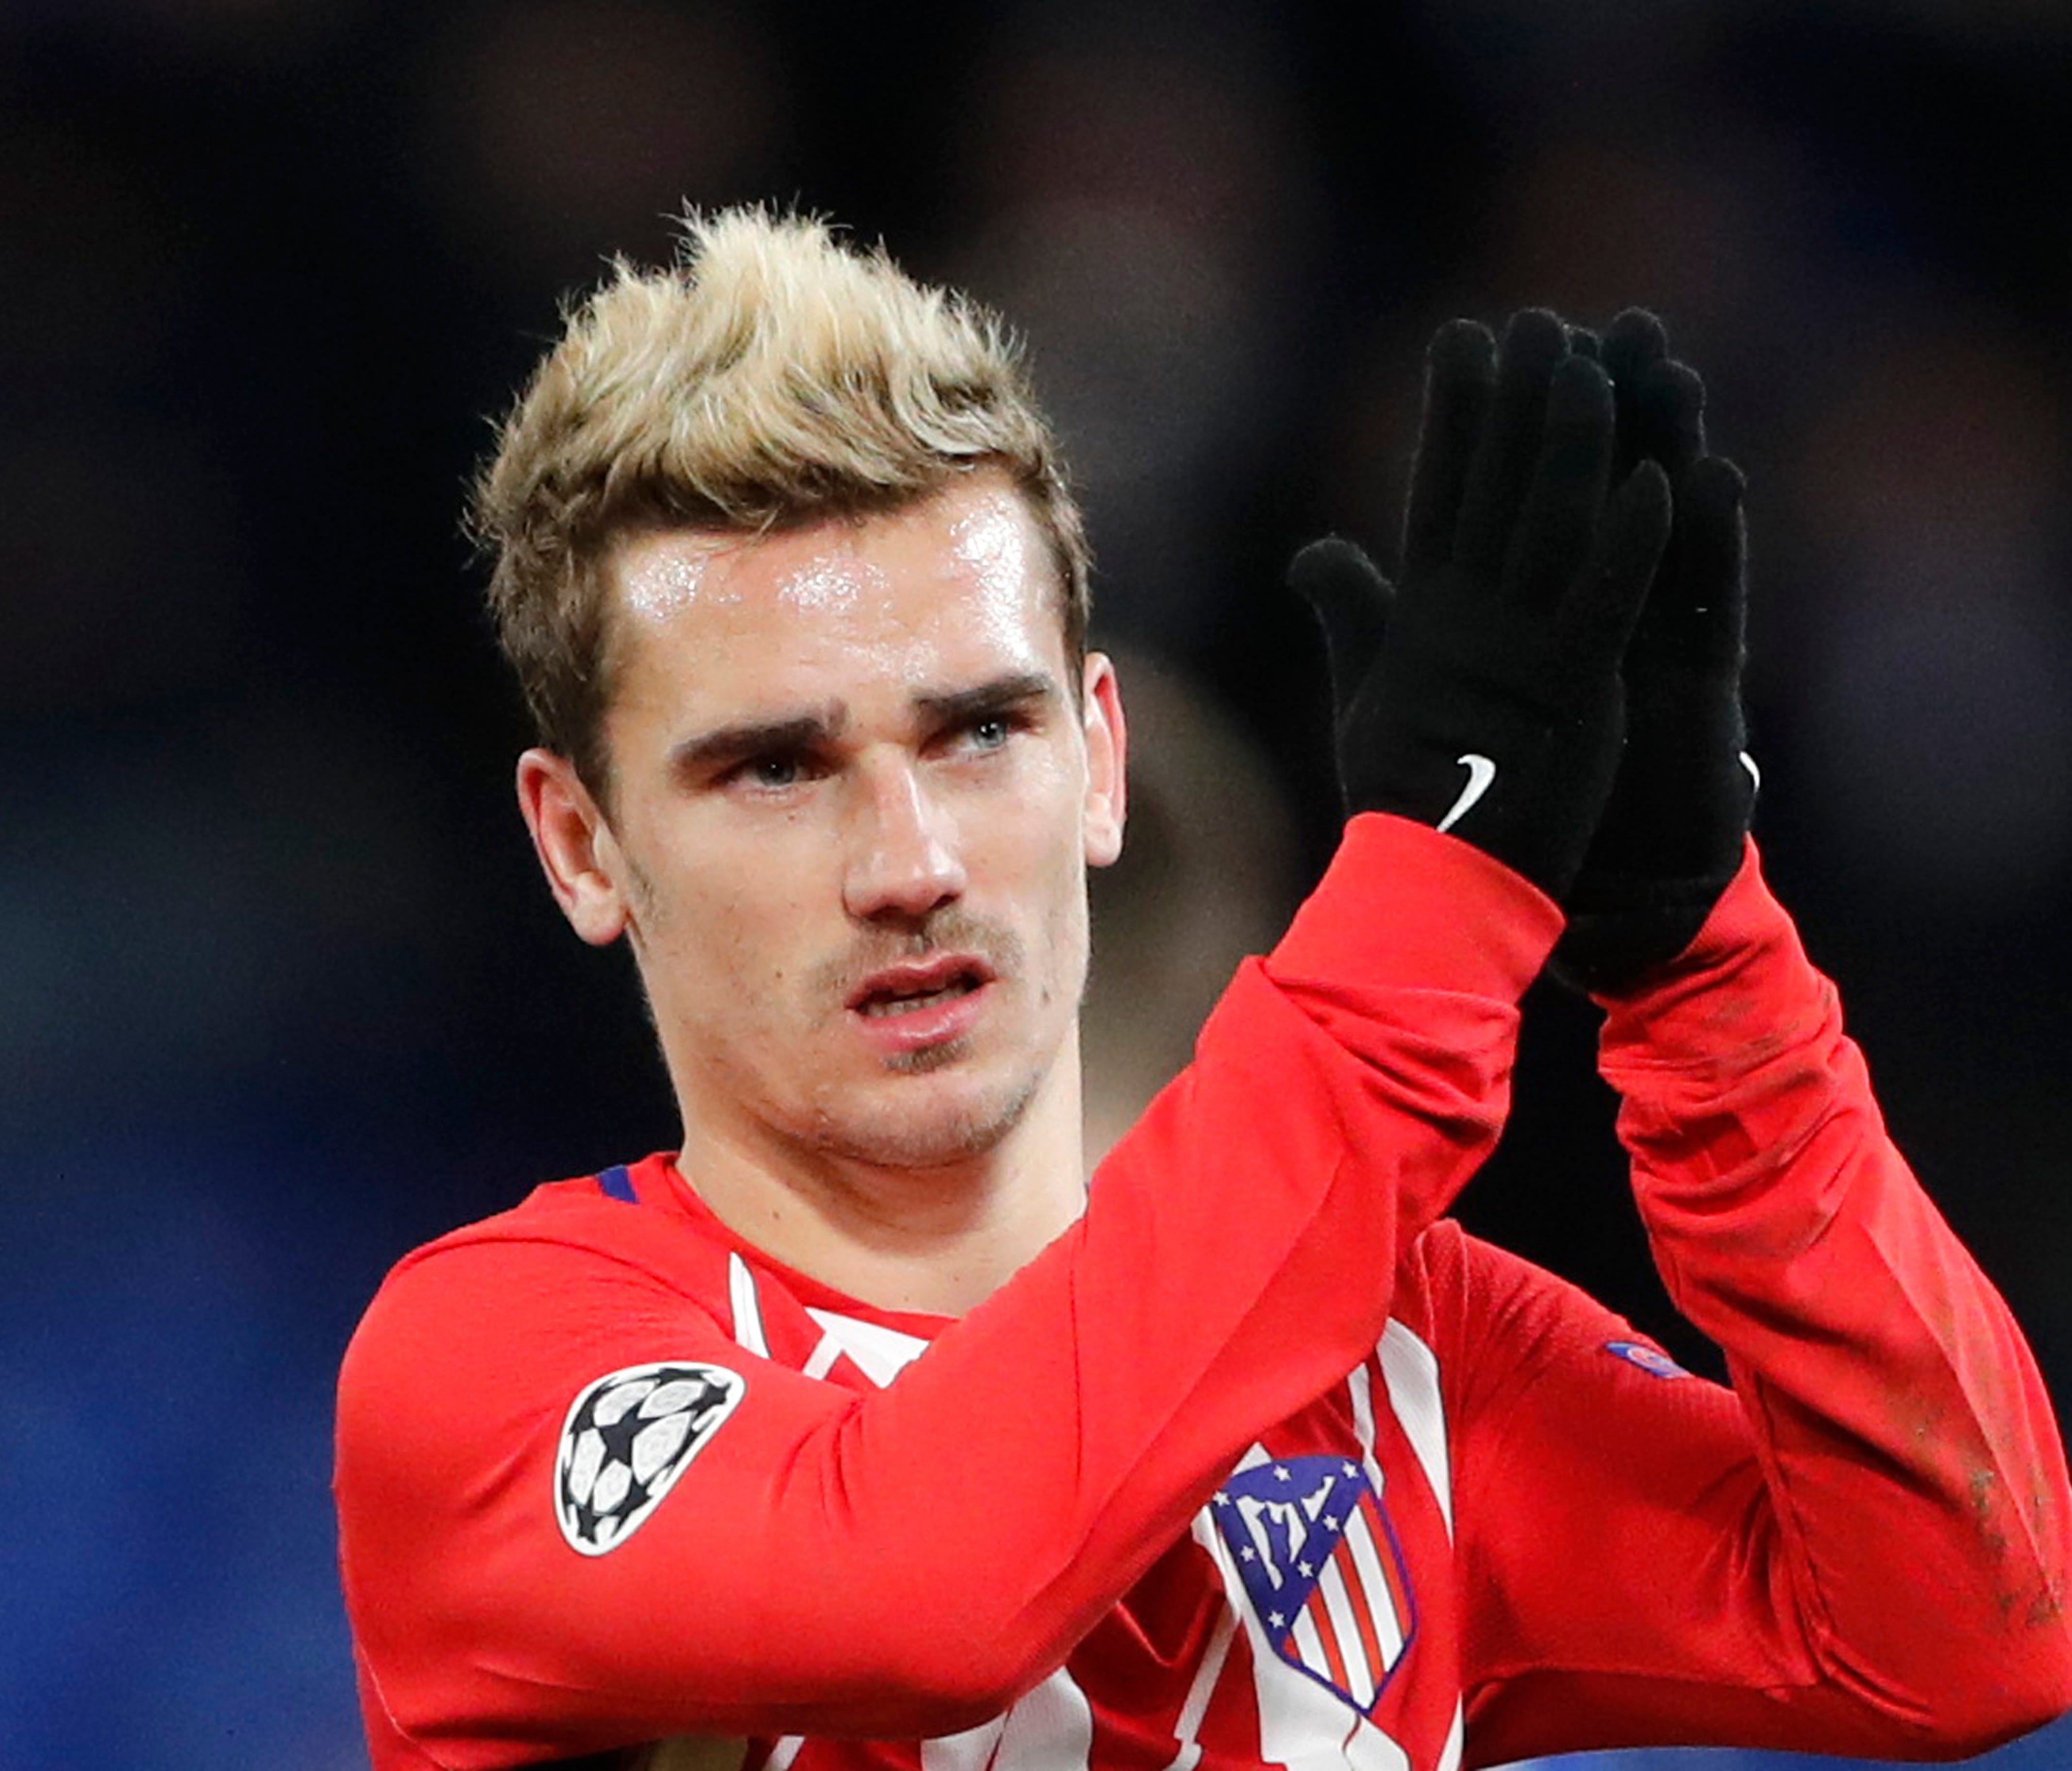 A Dec. 5, 2017 file photo of Atletico's Antoine Griezmann greeting fans after the 1-1 draw in the Champions League Group C soccer match between Chelsea and Atletico Madrid at Stamford Bridge stadium in London.  Griezmann has apologized after posting 